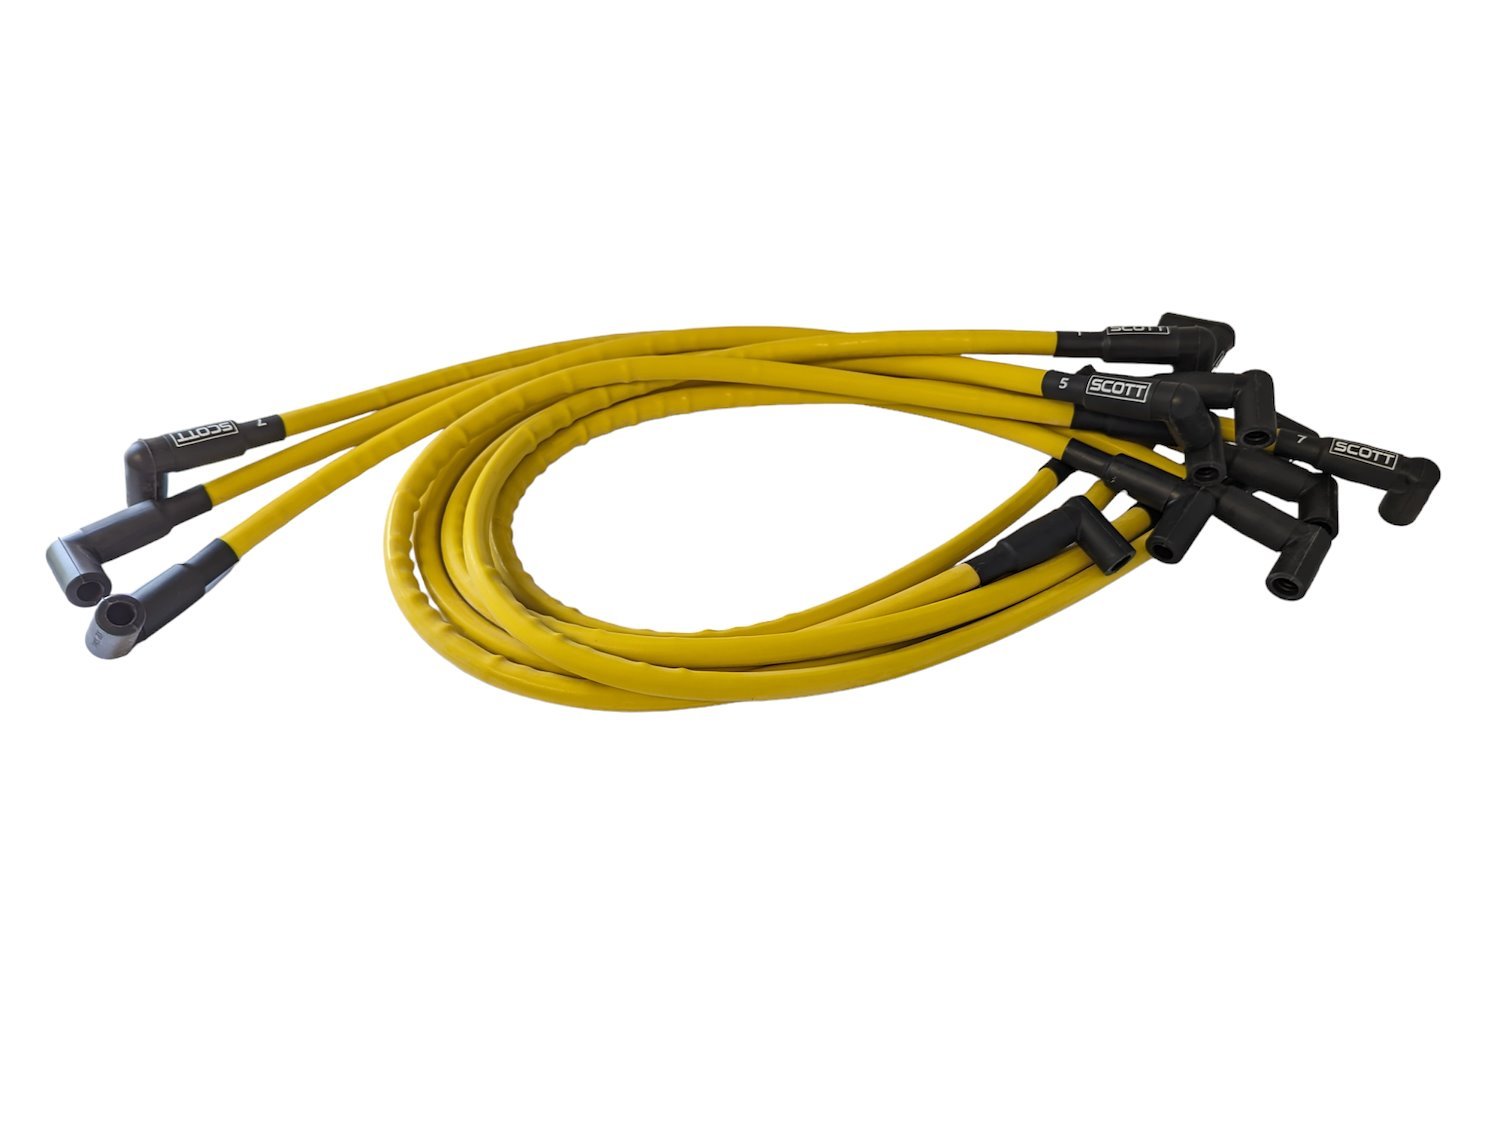 SPW-CH-416-7 High-Performance Silicone-Sleeved Spark Plug Wire Set for Big Block Chevy, Under Header [Yellow]